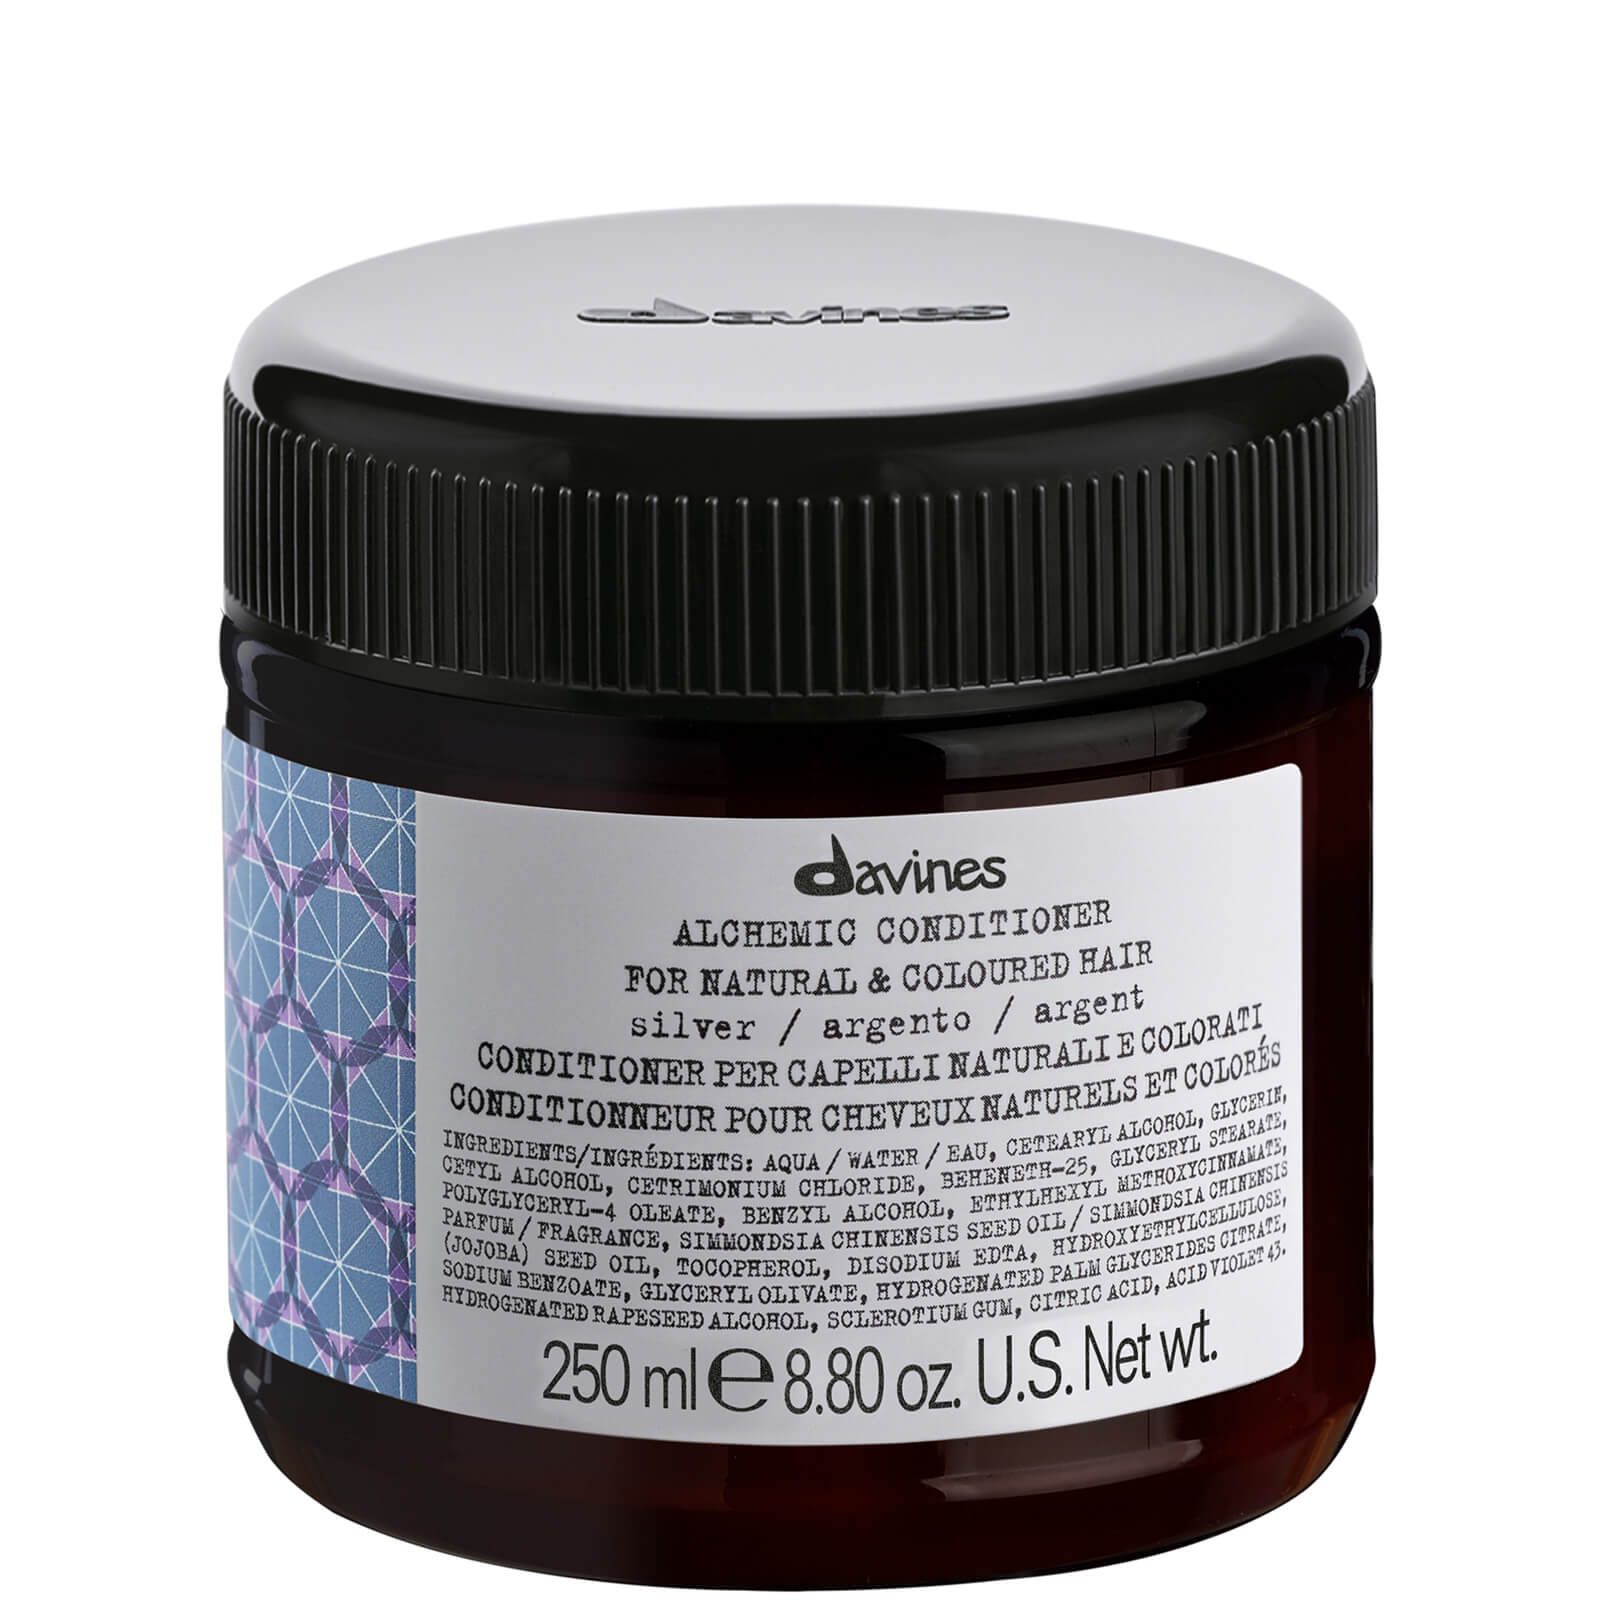 Photos - Hair Product Davines Alchemic Conditioner - Silver 250ml 